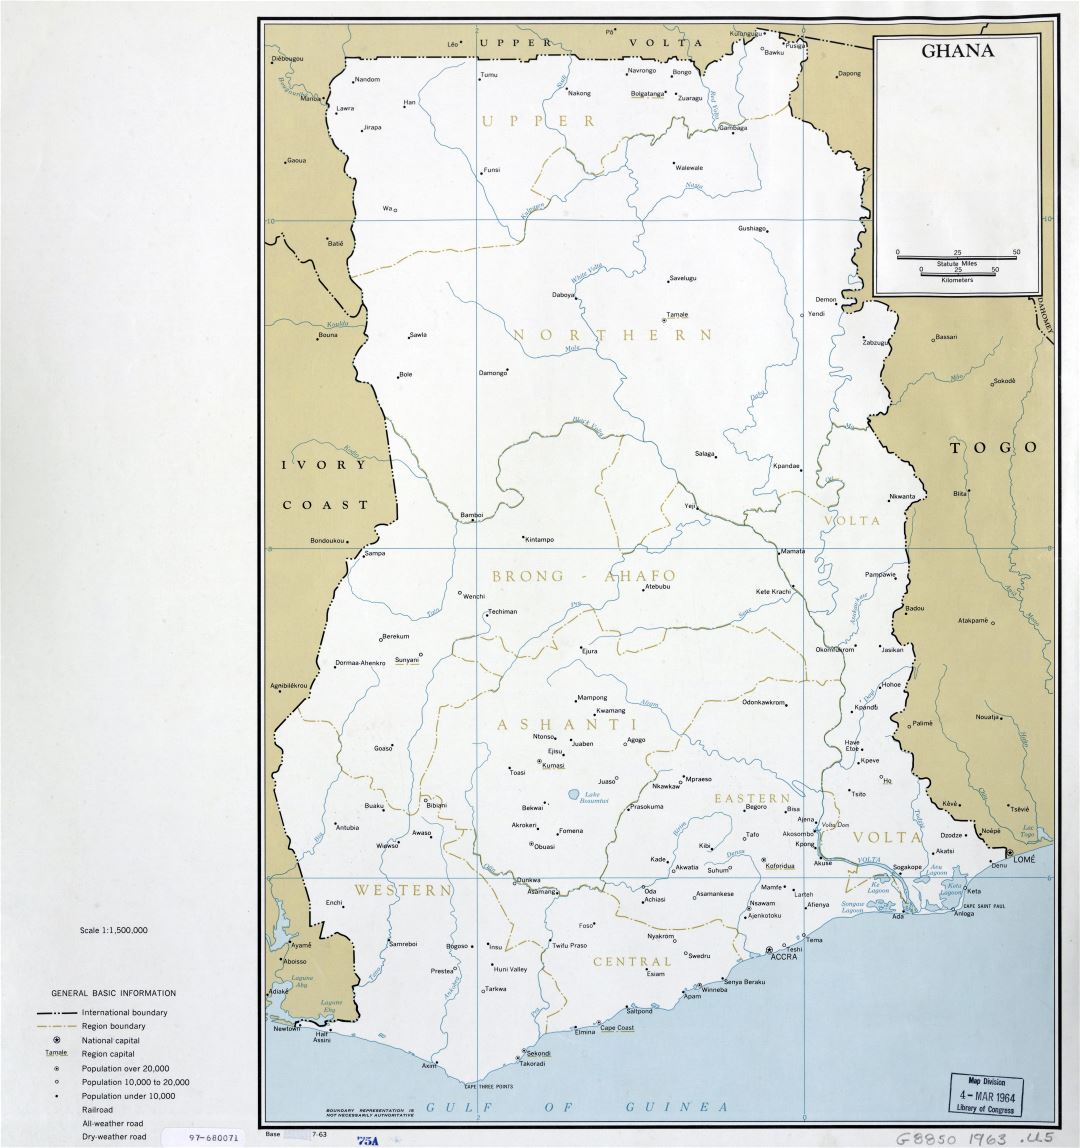 Large scale detailed political and administrative map of Ghana with cities - 1963